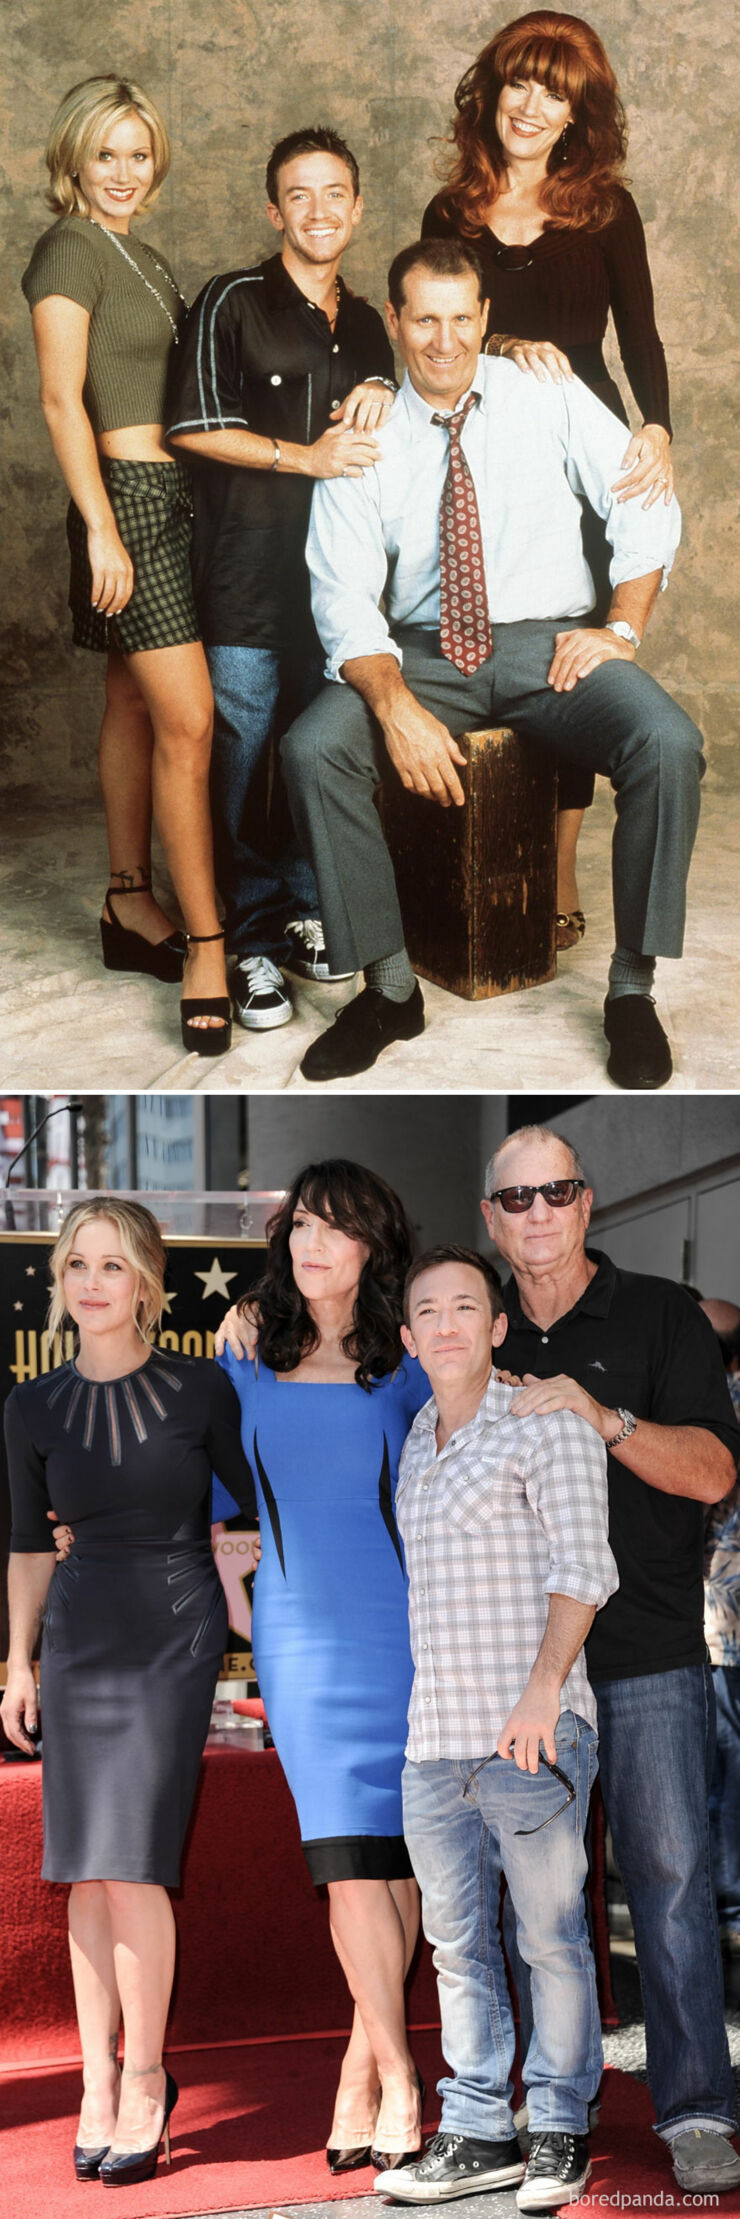 Tv & Movie Cast Reunions - Married With Children 1987 Vs. 2014